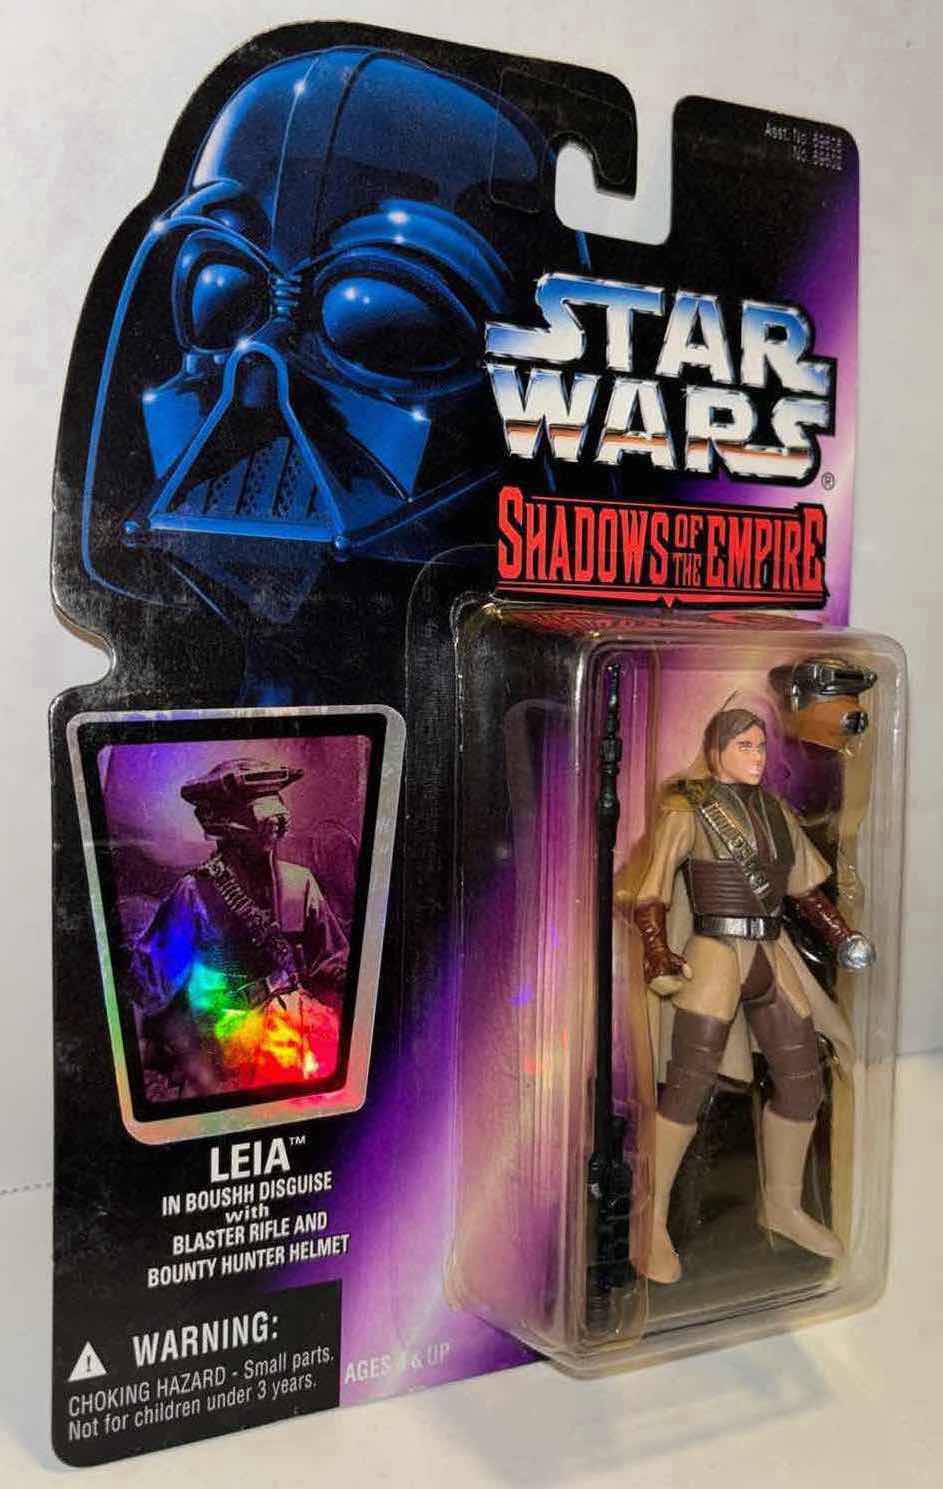 Photo 3 of NEW MINT COND 1996 HASBRO KENNER STAR WARS 3-PACK BUNDLE, SHADOWS OF THE EMPIRE “CHEWBACCA”, “LEIA” & “LUKE SKYWALKER” IN CLEAR CLAMSHELL PACKAGING